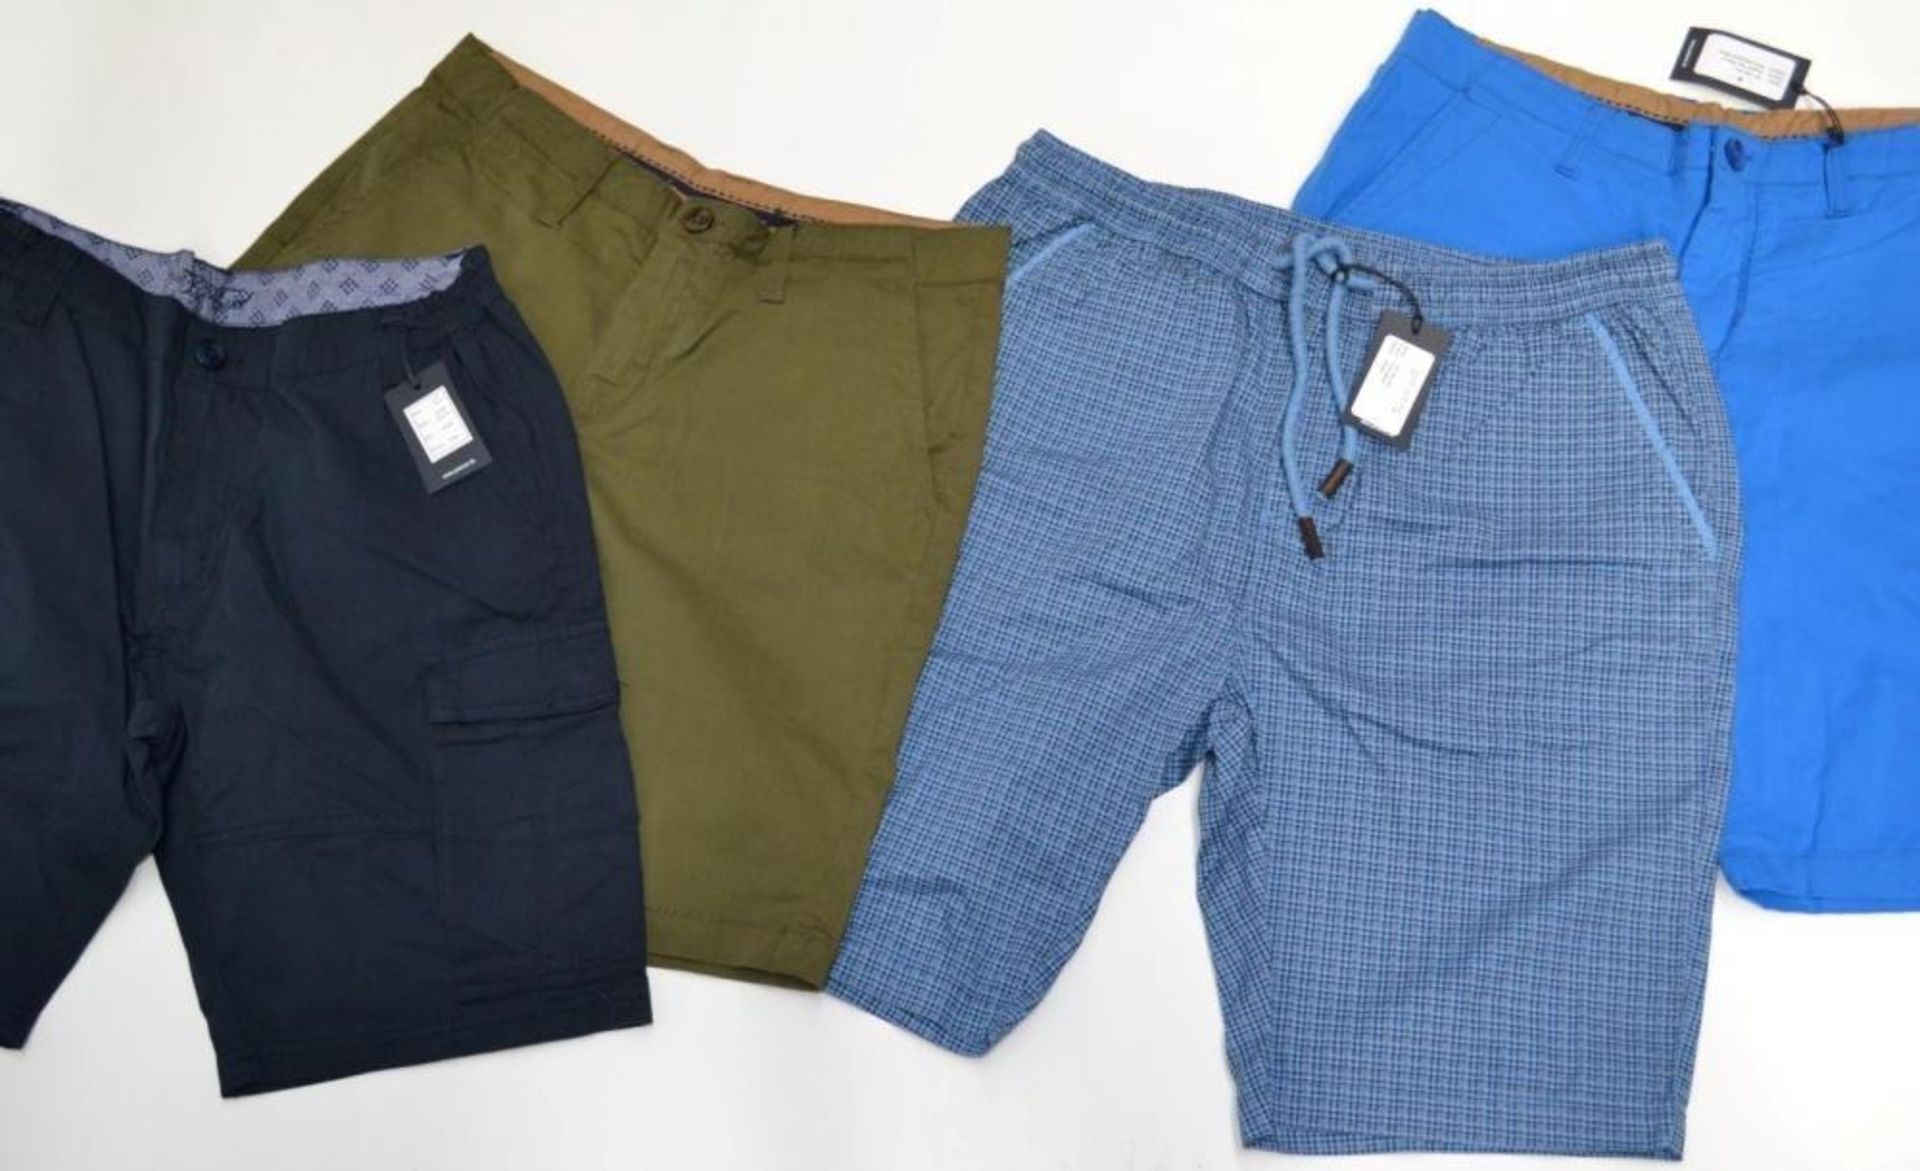 4 x Assorted Pairs Of PRE END Branded Mens Cotton Shorts - New Stock With Tags - Recent Retail Closu - Image 2 of 3